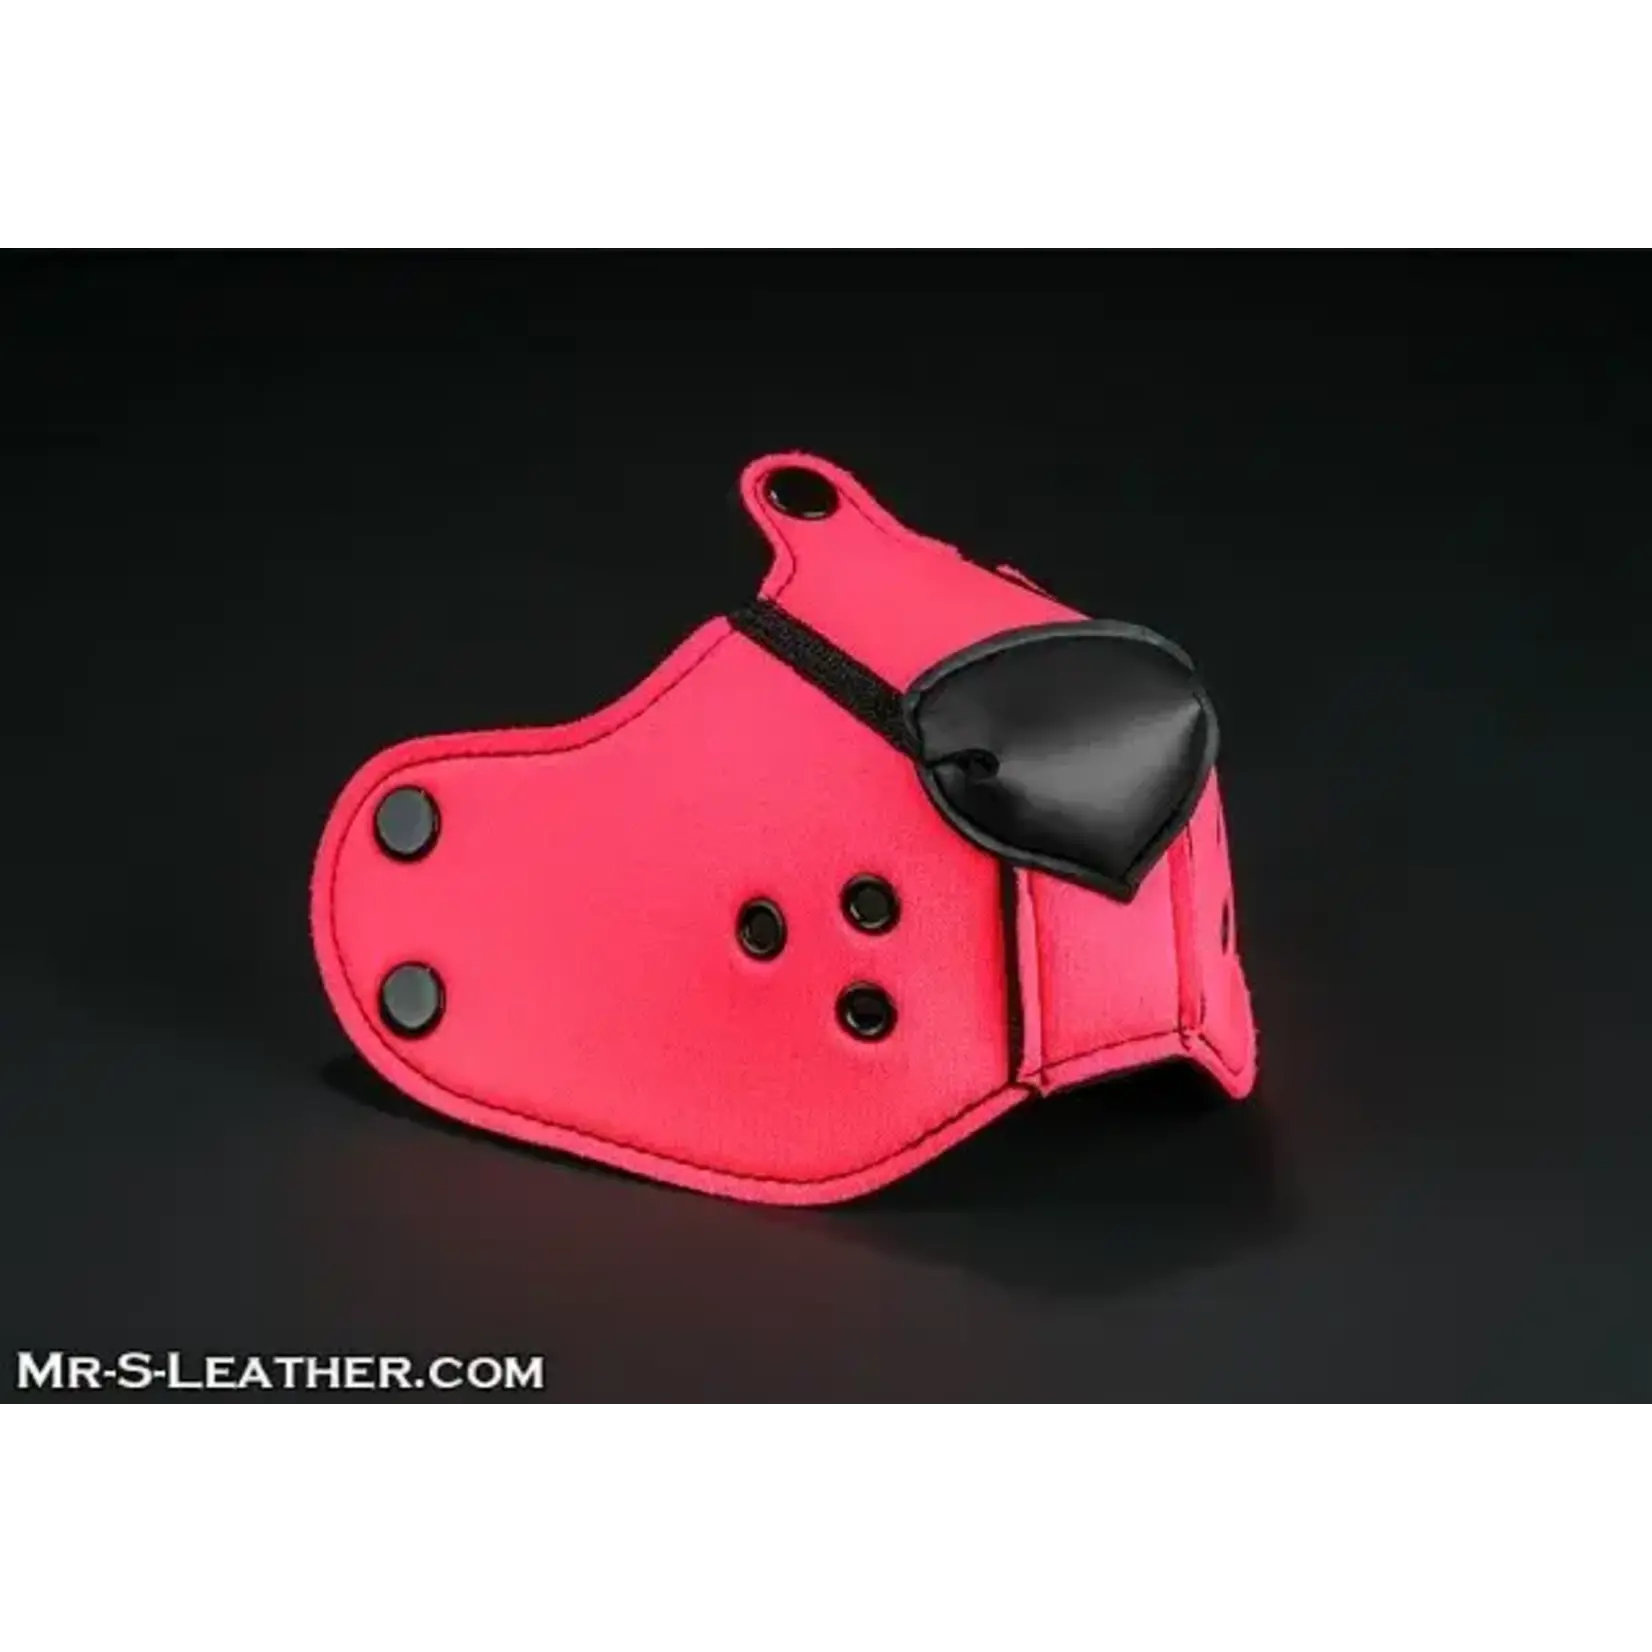 Mr. S Leather Mr. S Leather - Neo K9 Muzzle - ONE SIZE